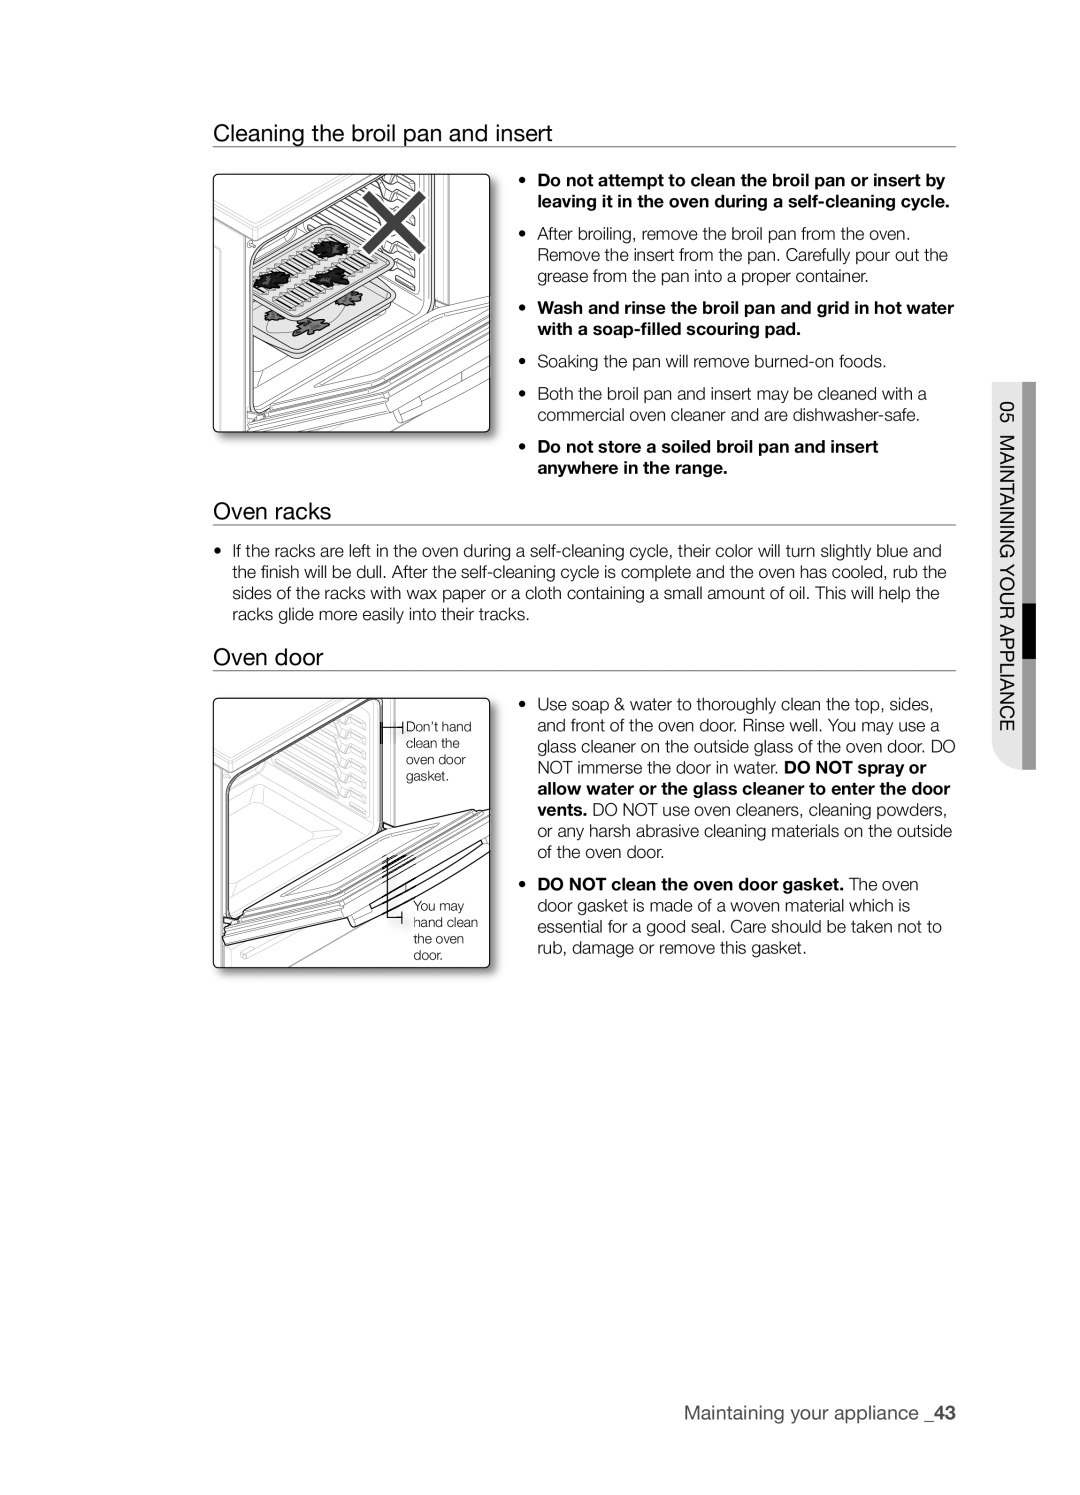 Samsung FTQ386LWUX user manual Cleaning the broil pan and insert, Oven racks, Oven door, Maintaining your appliance  